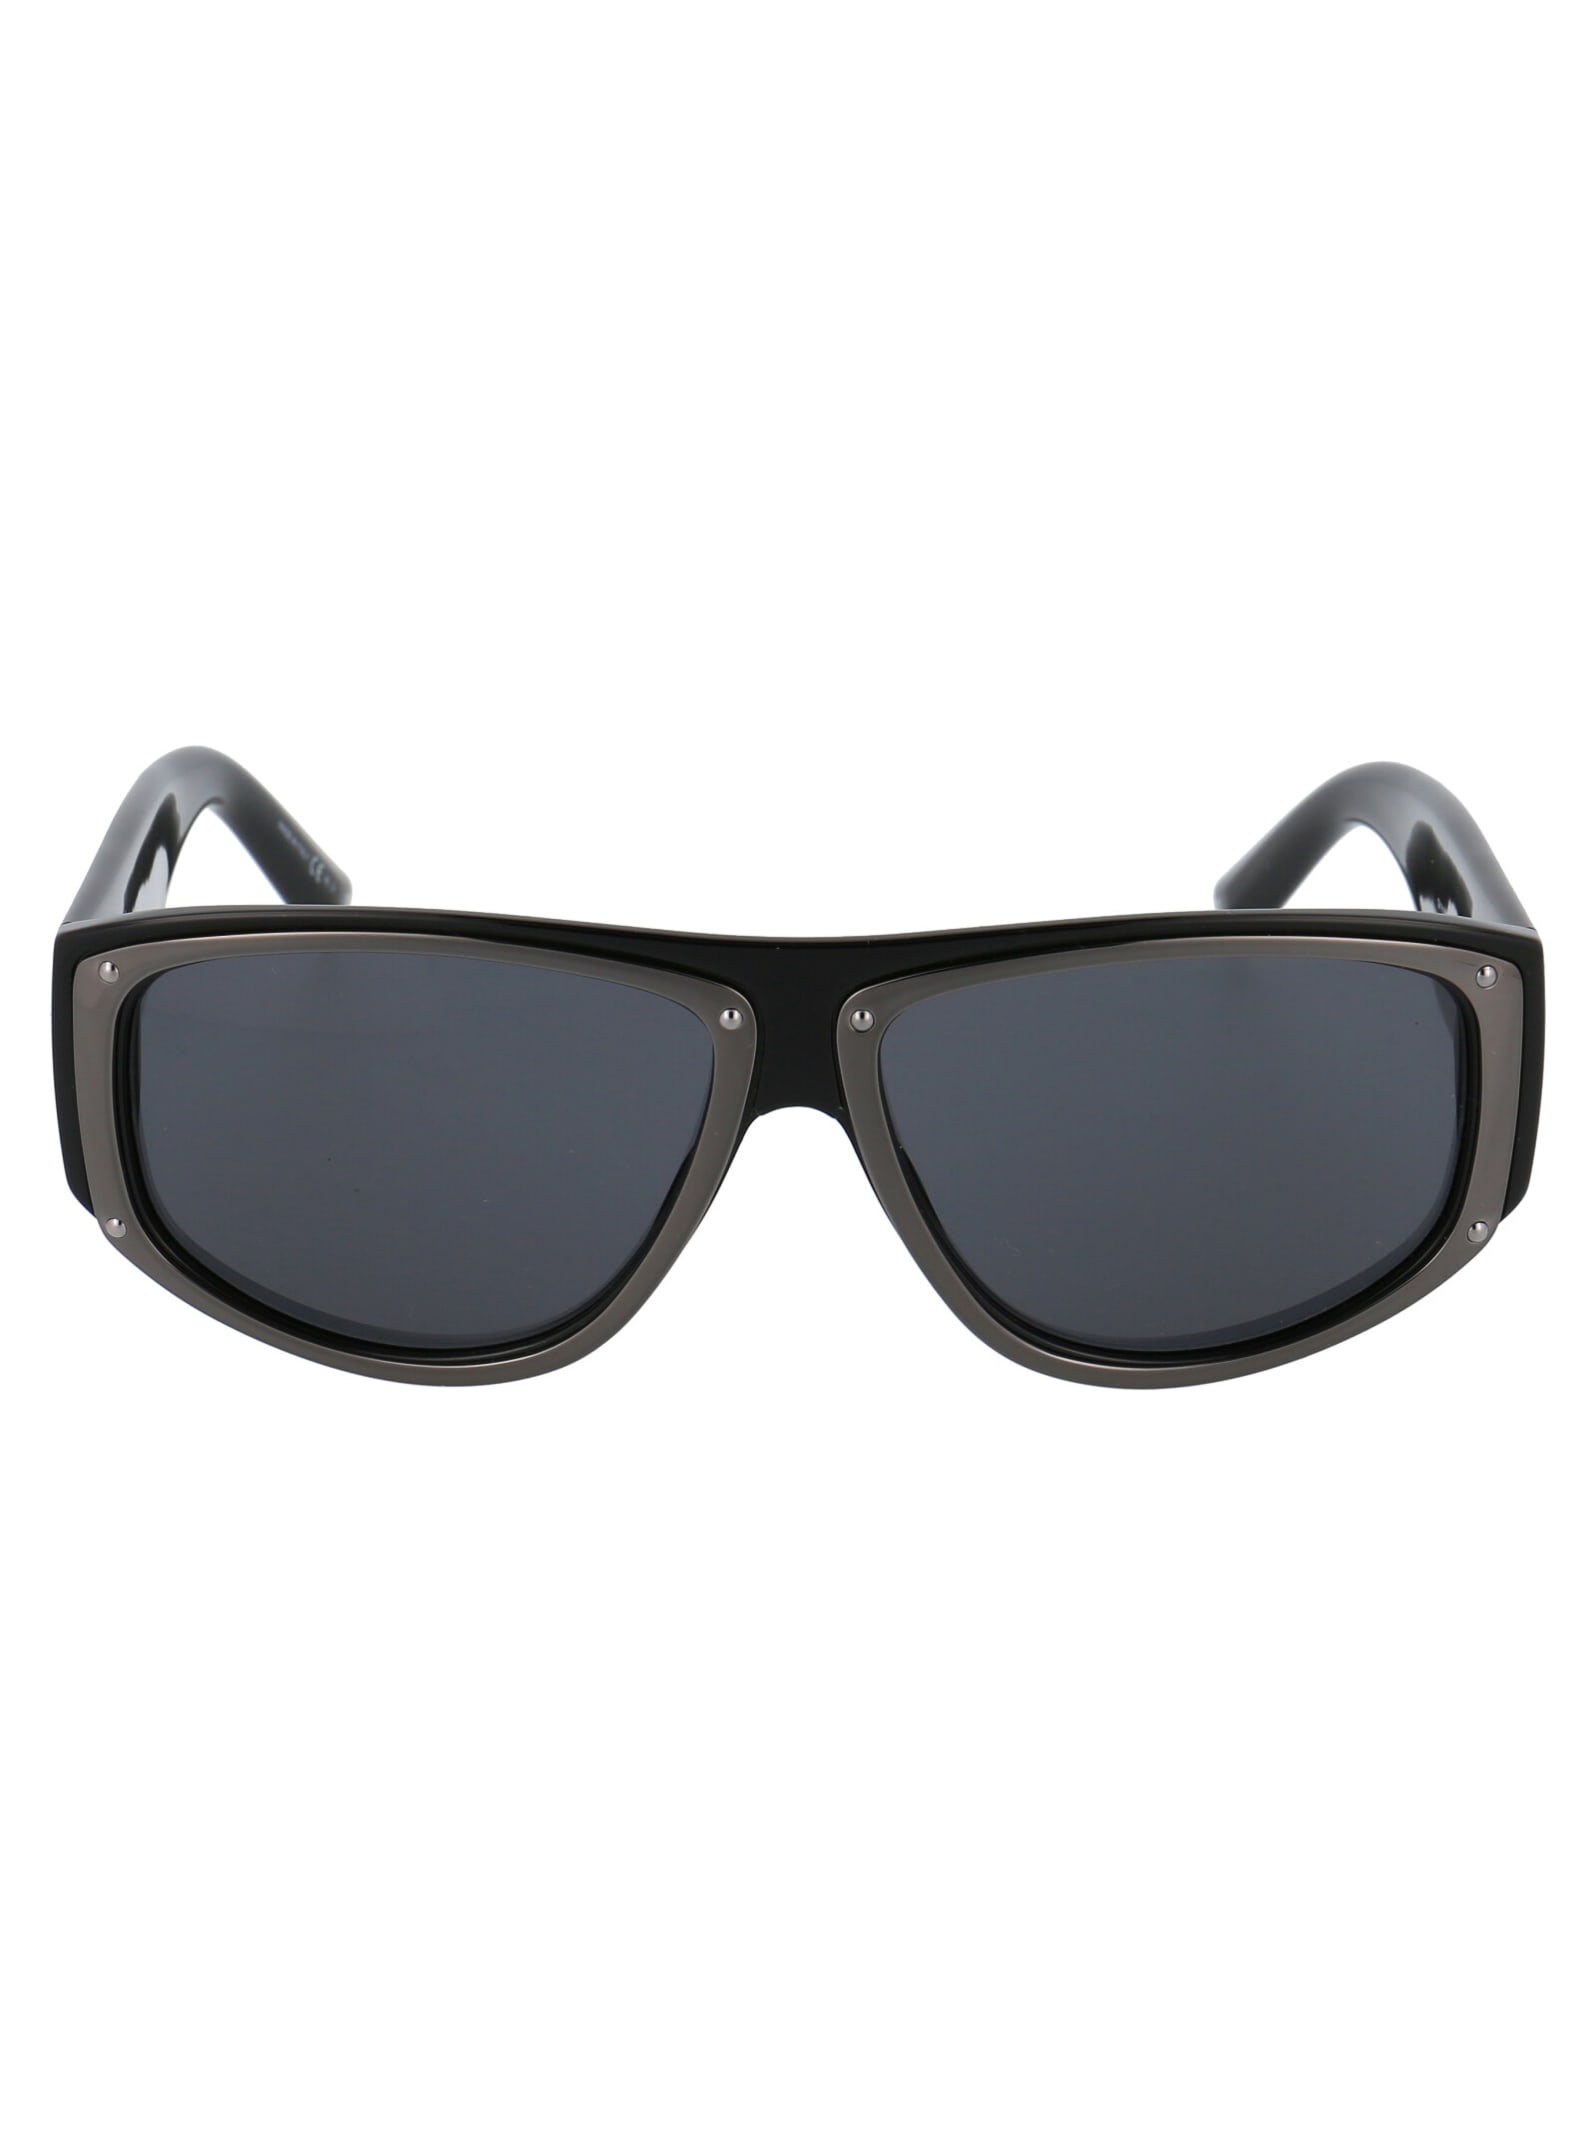 Givenchy Gv 7177/s Sunglasses In 807ir Black